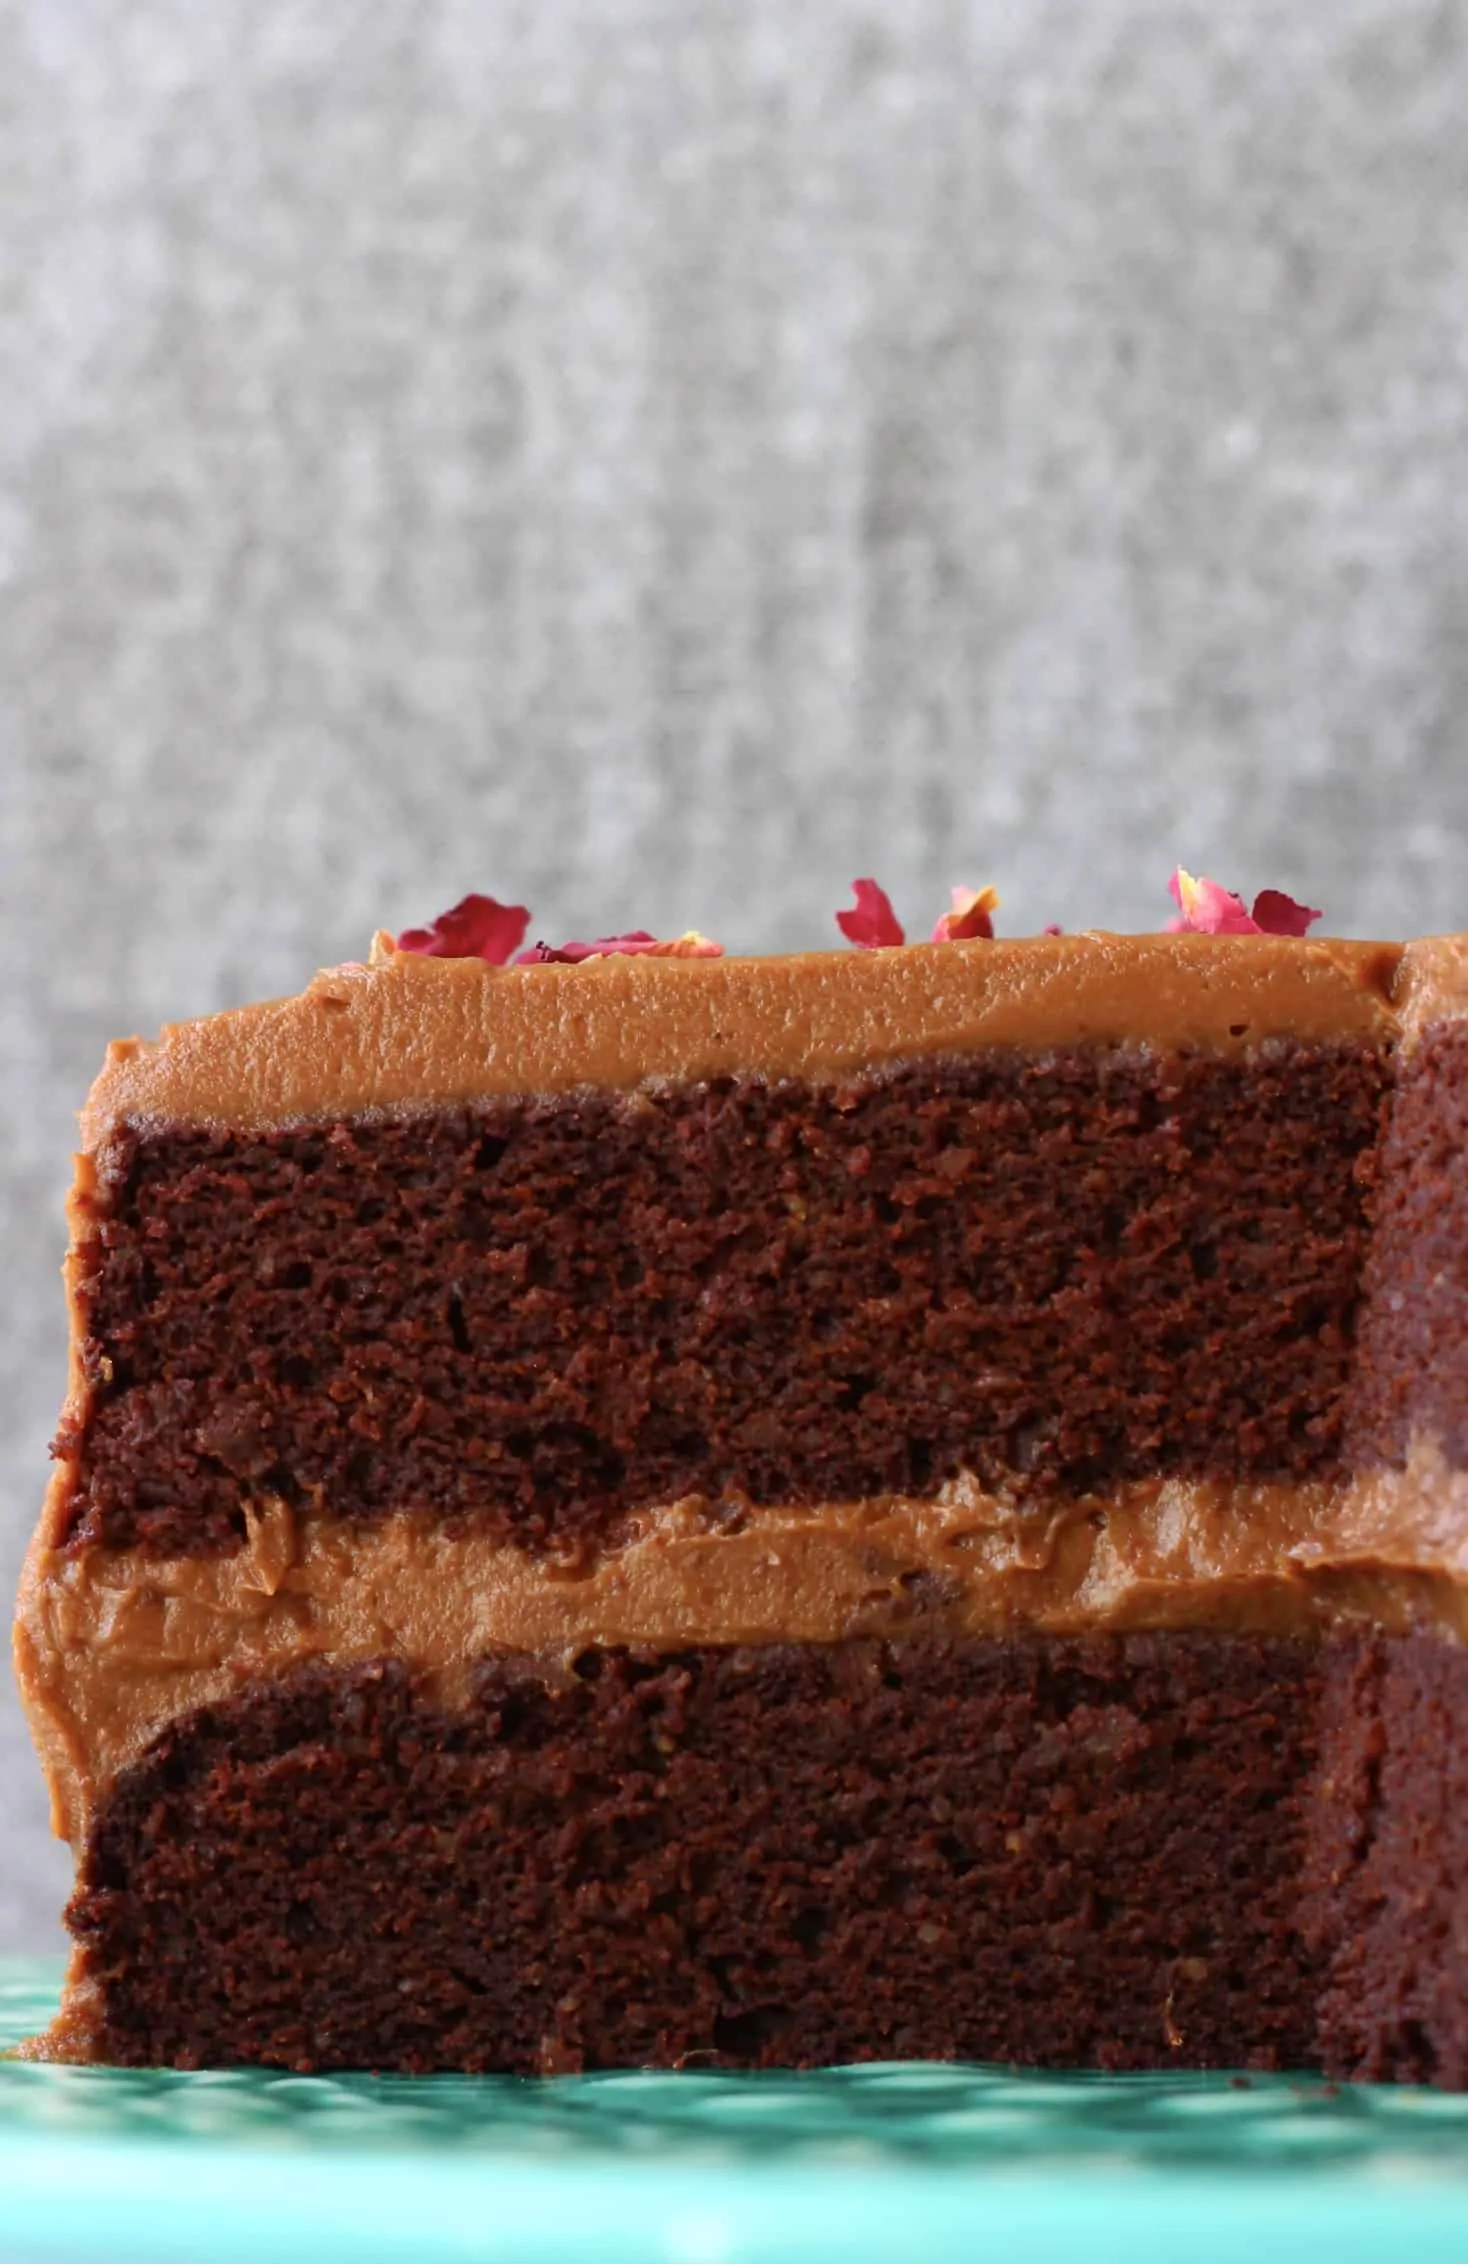 Gluten-free vegan chocolate cake with chocolate frosting on a cake stand